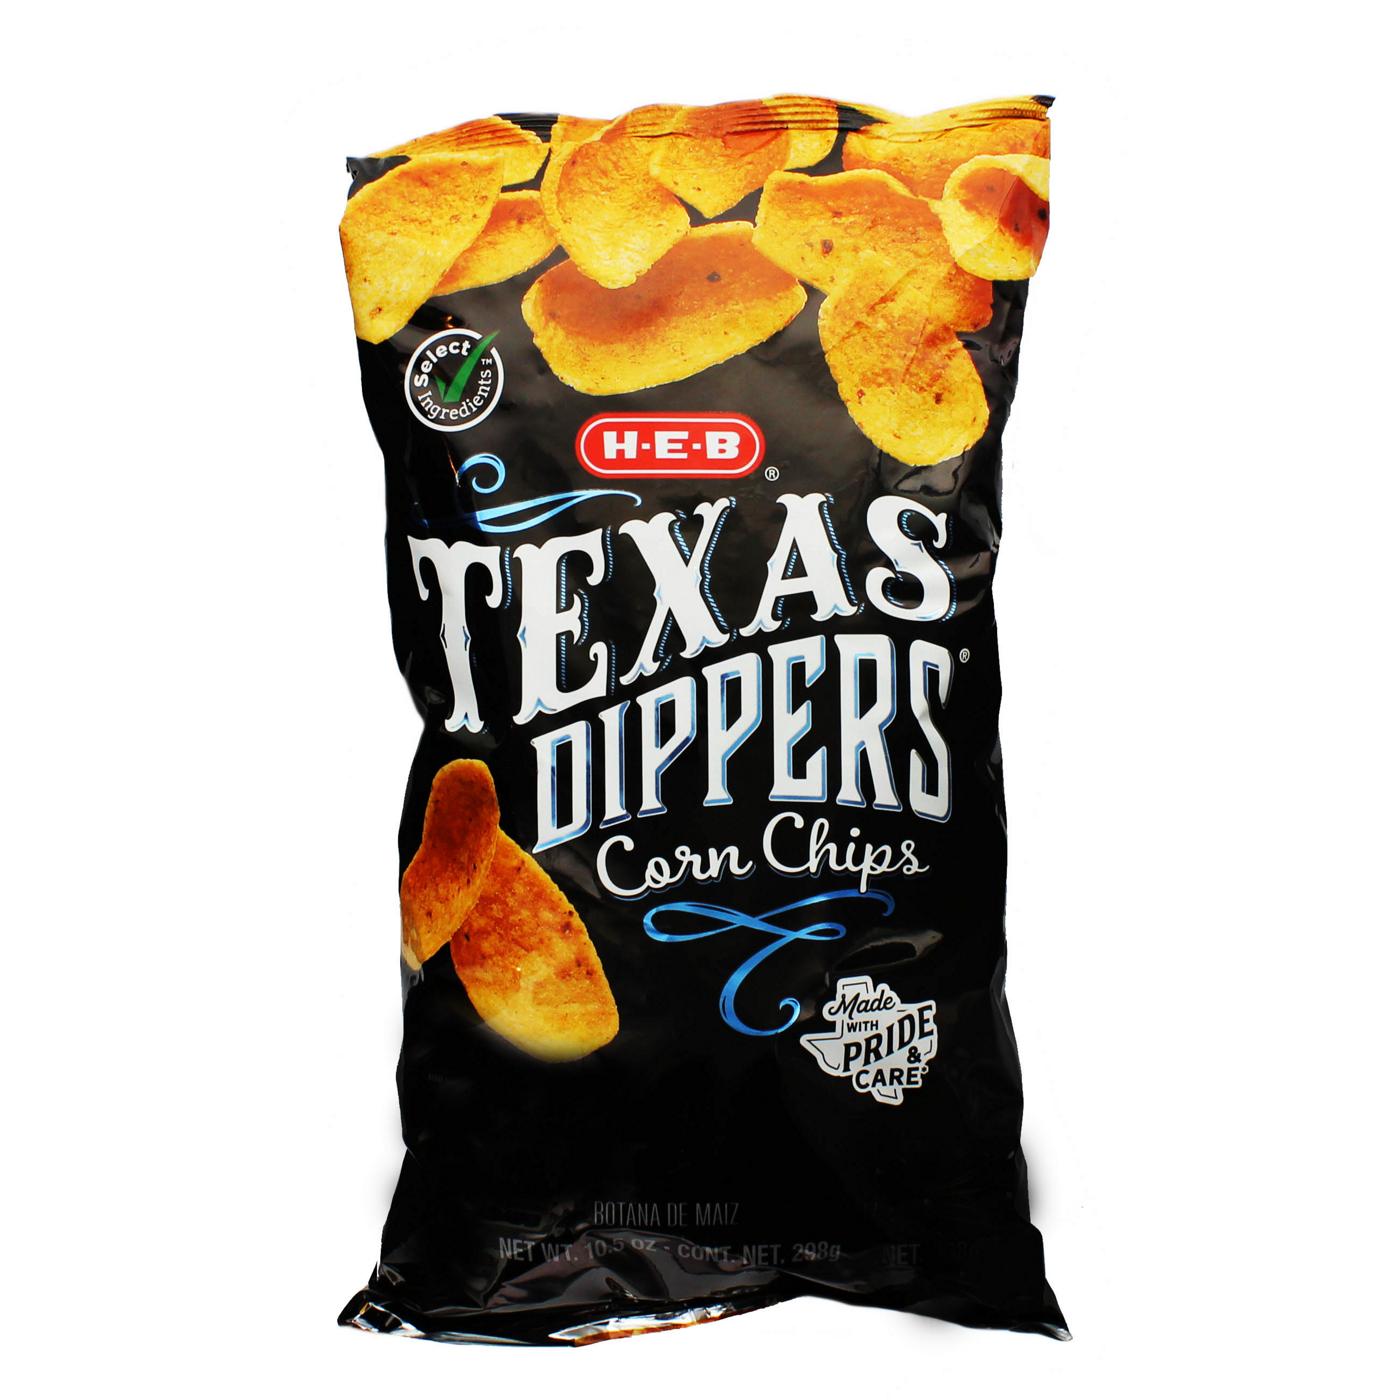 H-E-B Texas Dippers Corn Chips; image 1 of 2